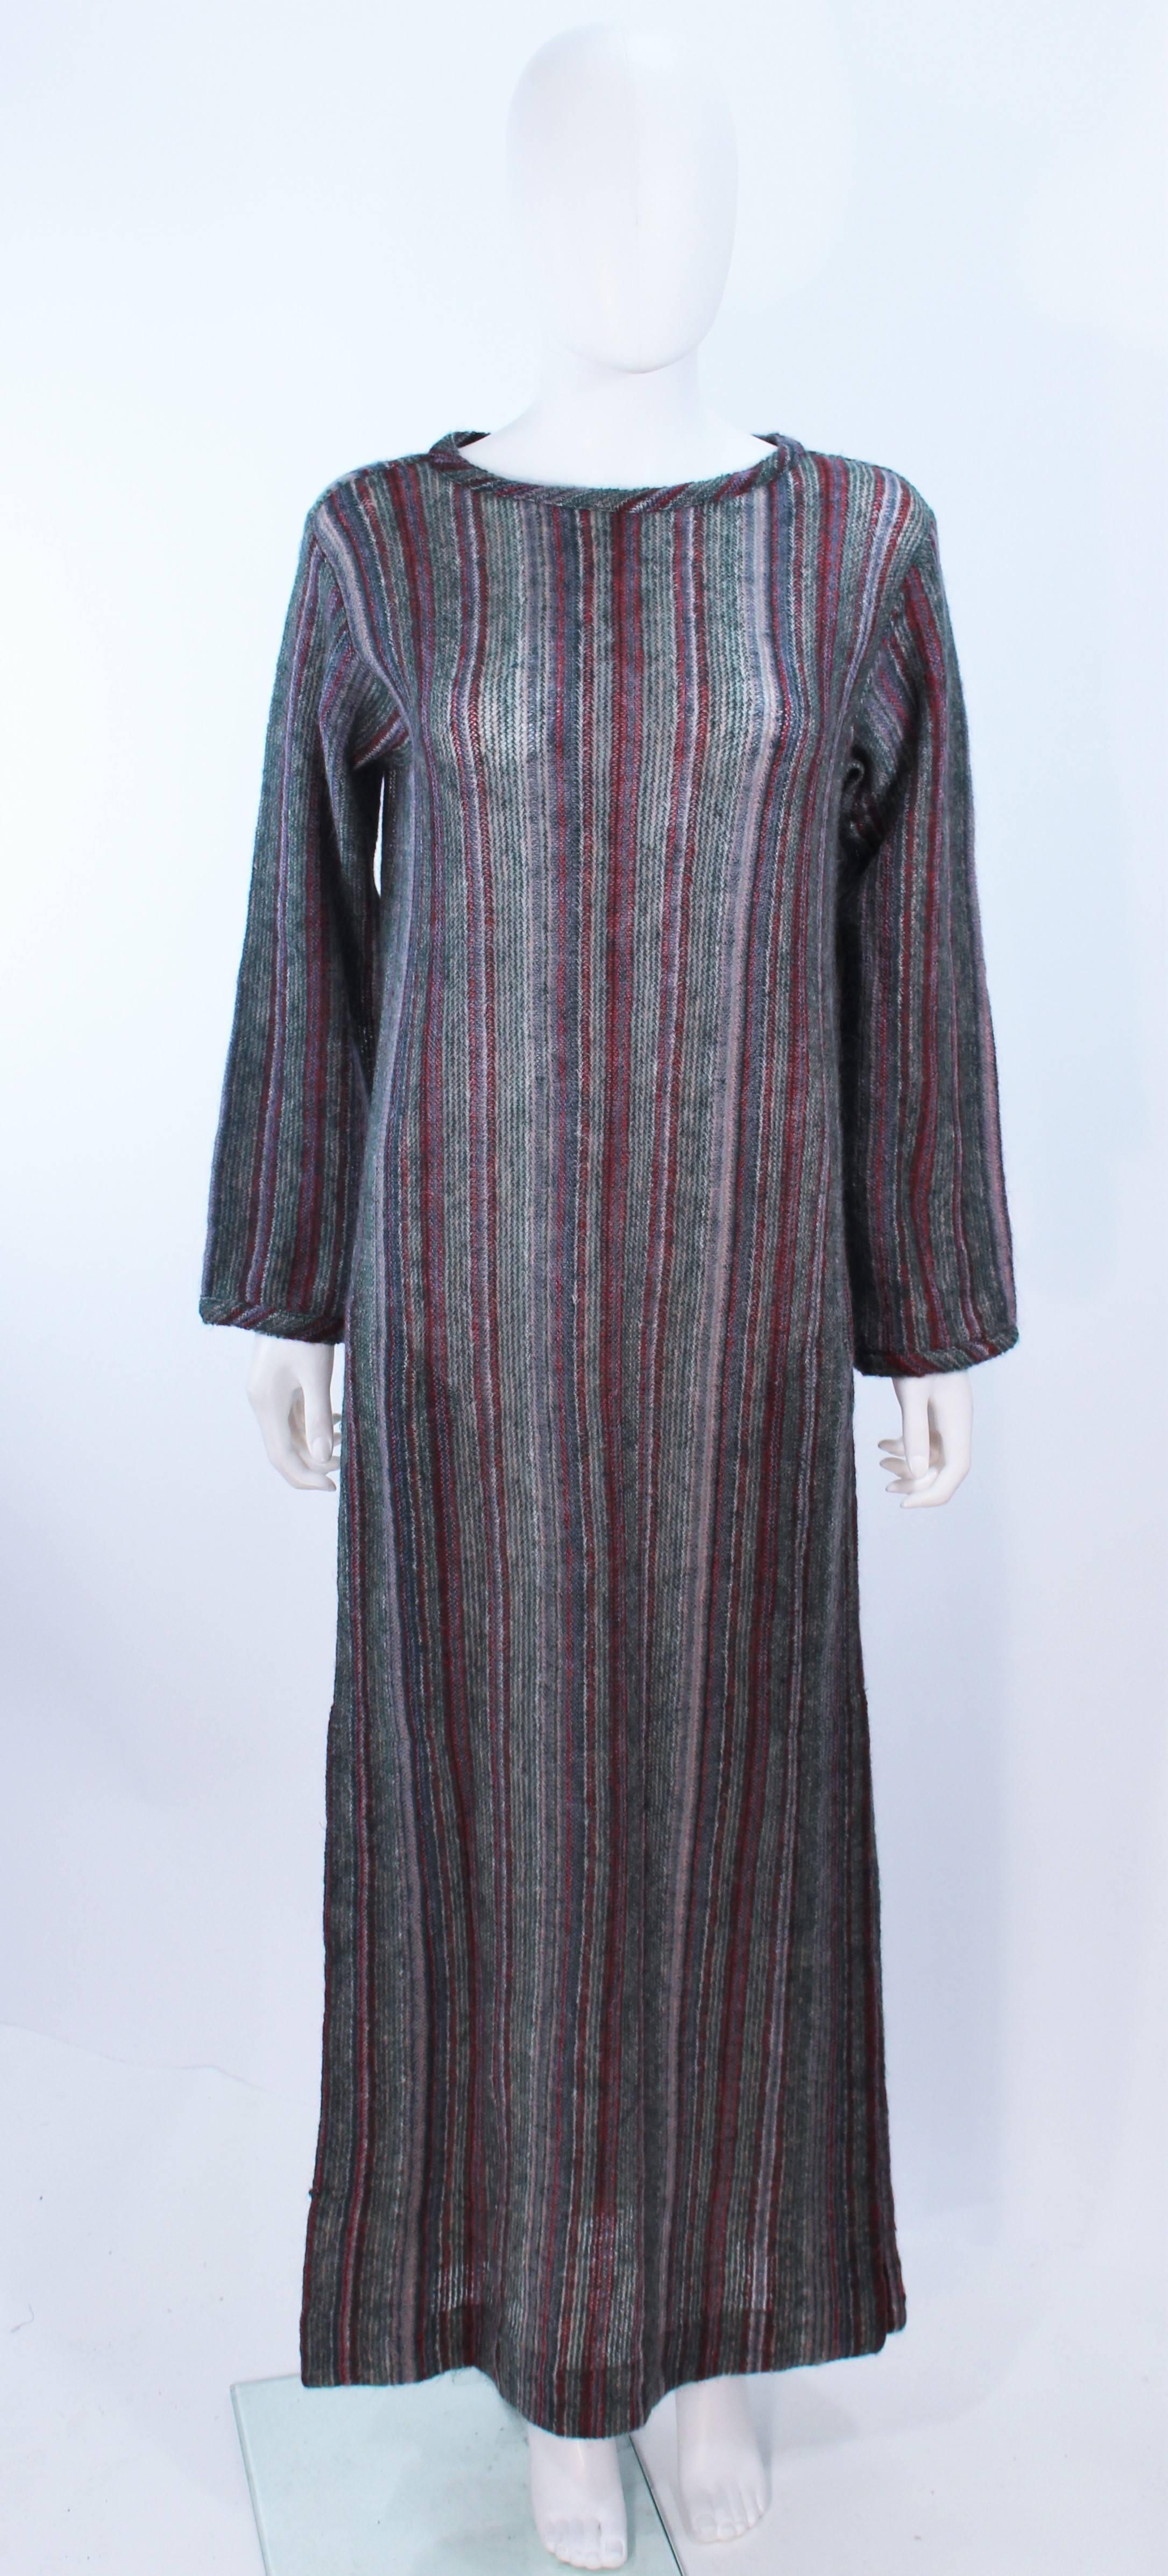 This Missoni dress is composed of a grey multi color wool knit. Features a full length style with side pockets. In excellent vintage condition.

**Please cross-reference measurements for personal accuracy. Size in description box is an